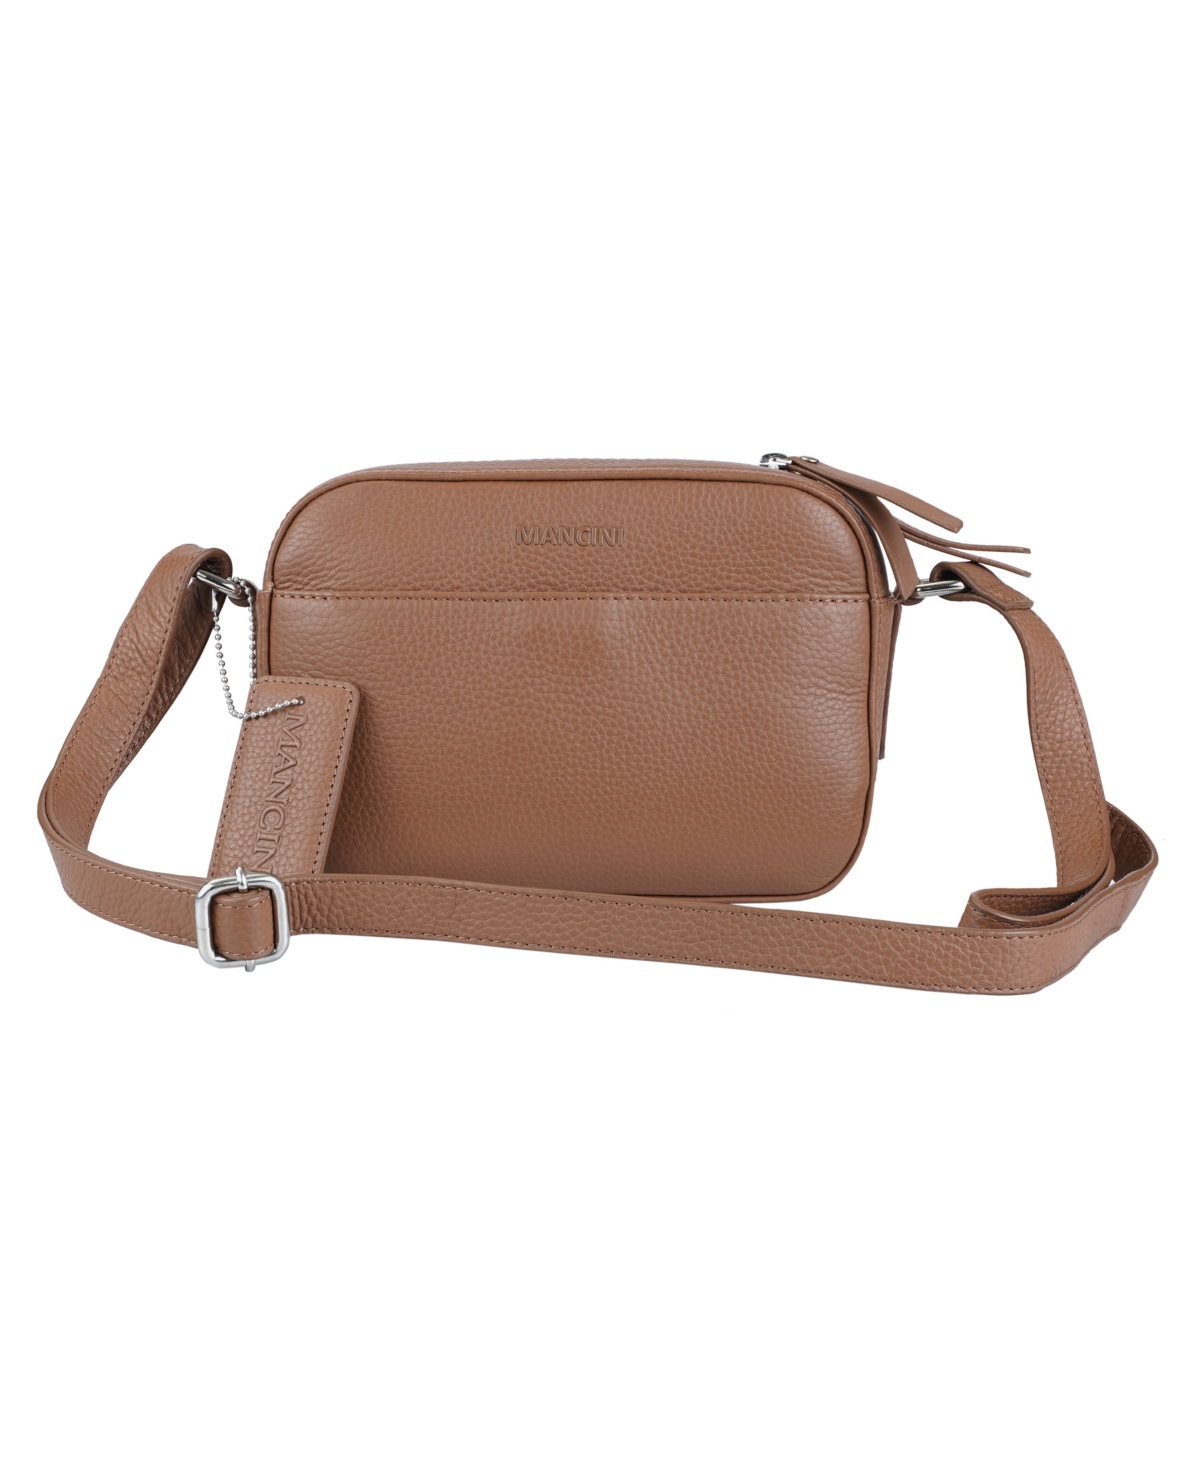 Mancini Pebbled Collection Clara Leather Small Crossbody Bag In Camel